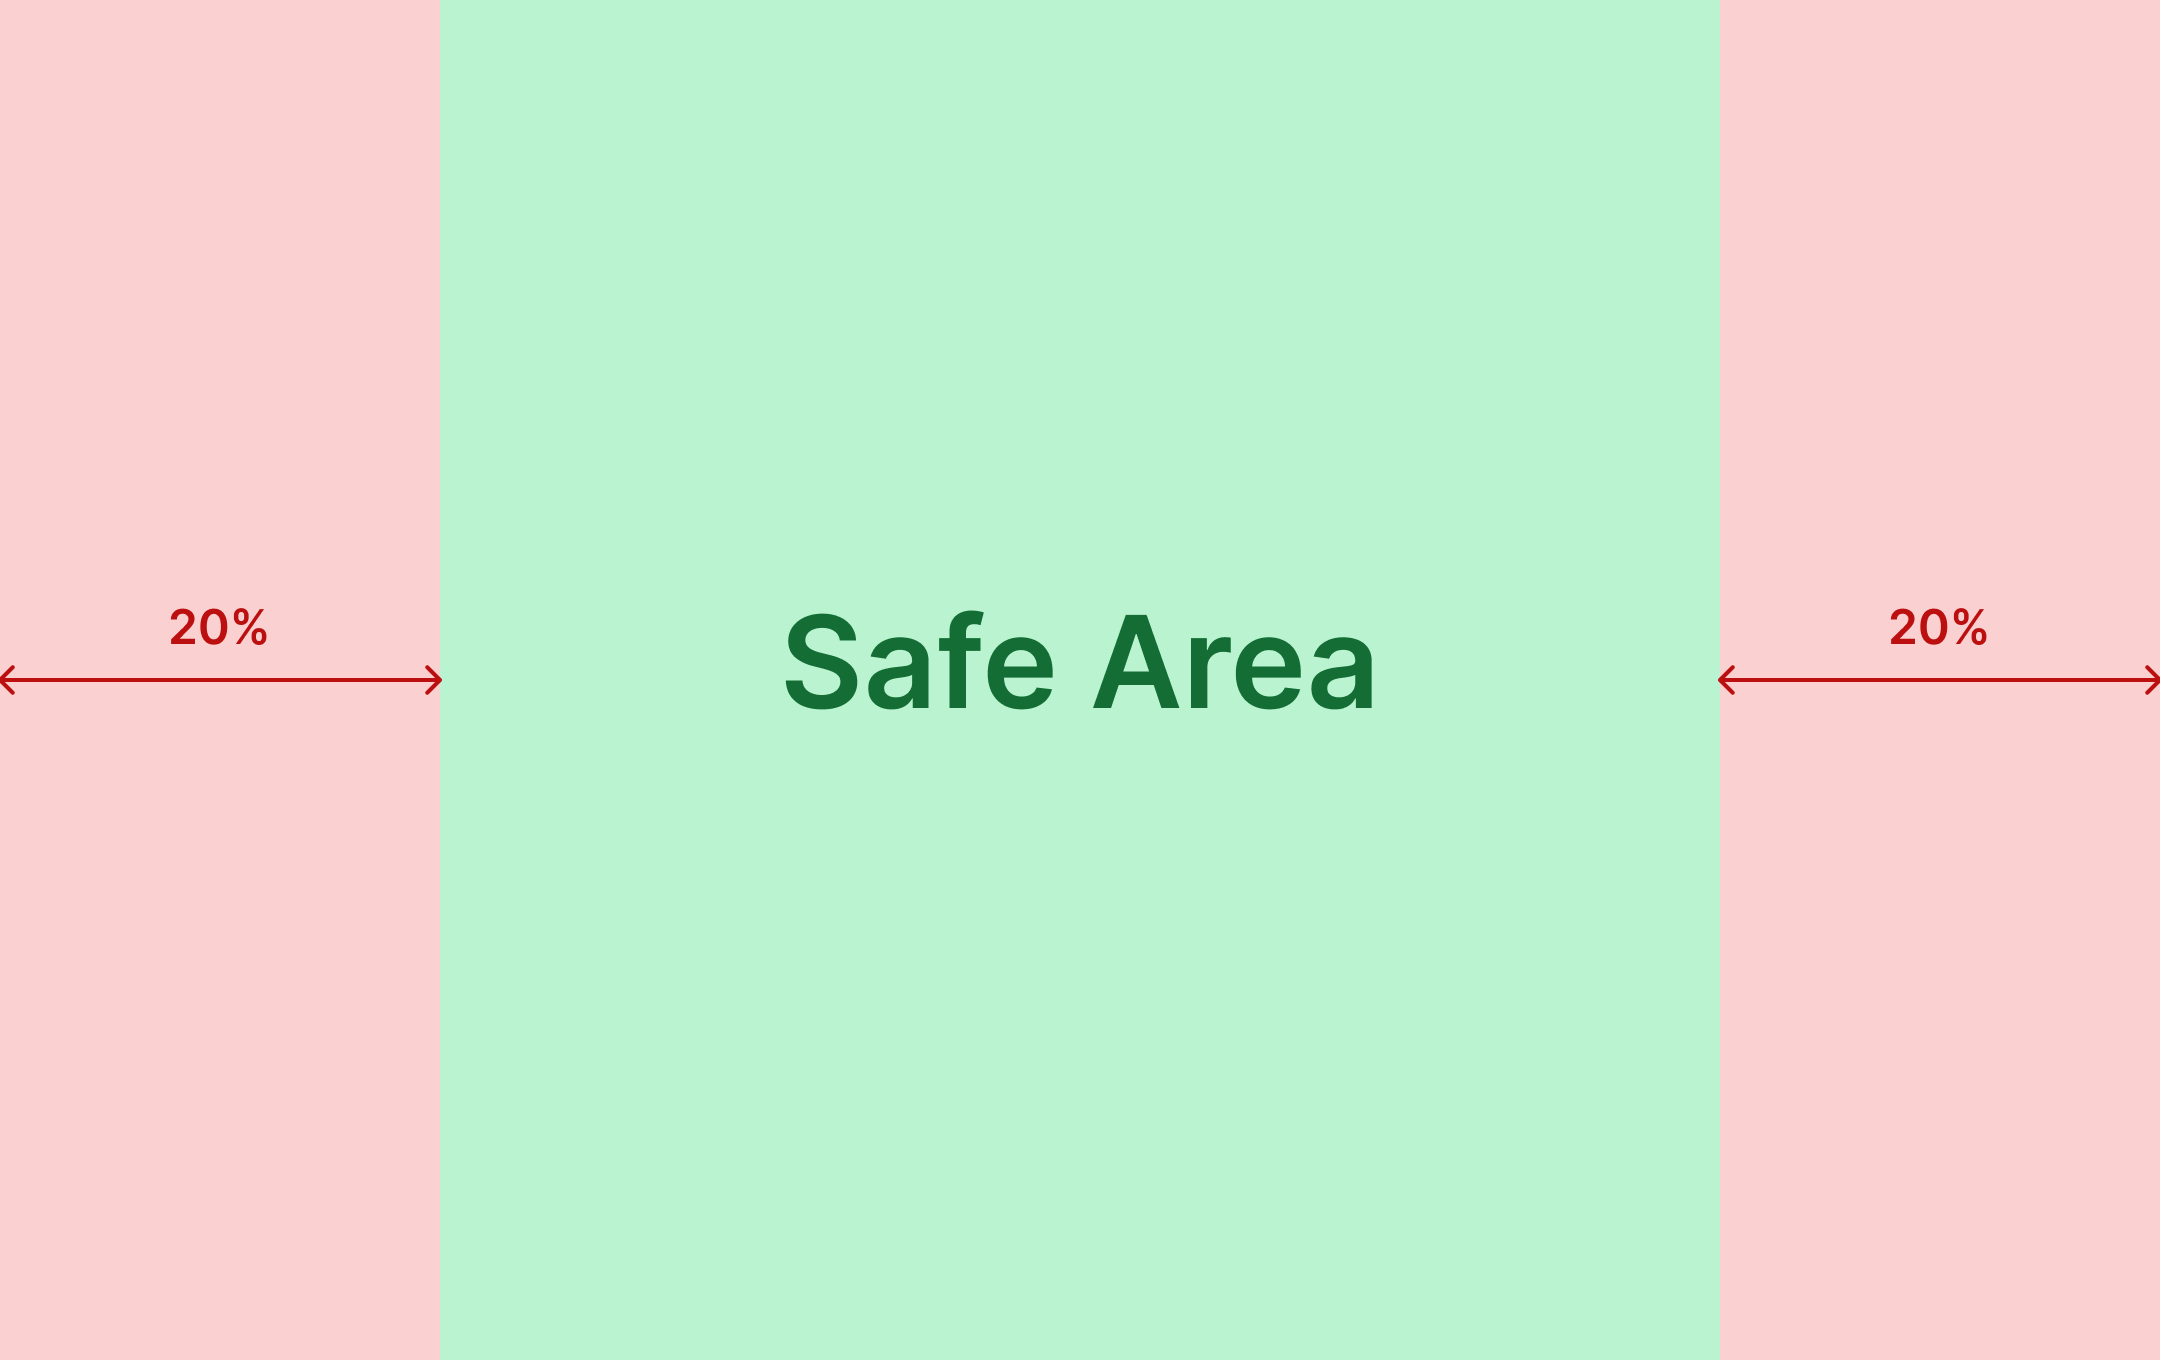 Keep the most important parts of your image (e.g. text, key elements) within the SAFE AREA.